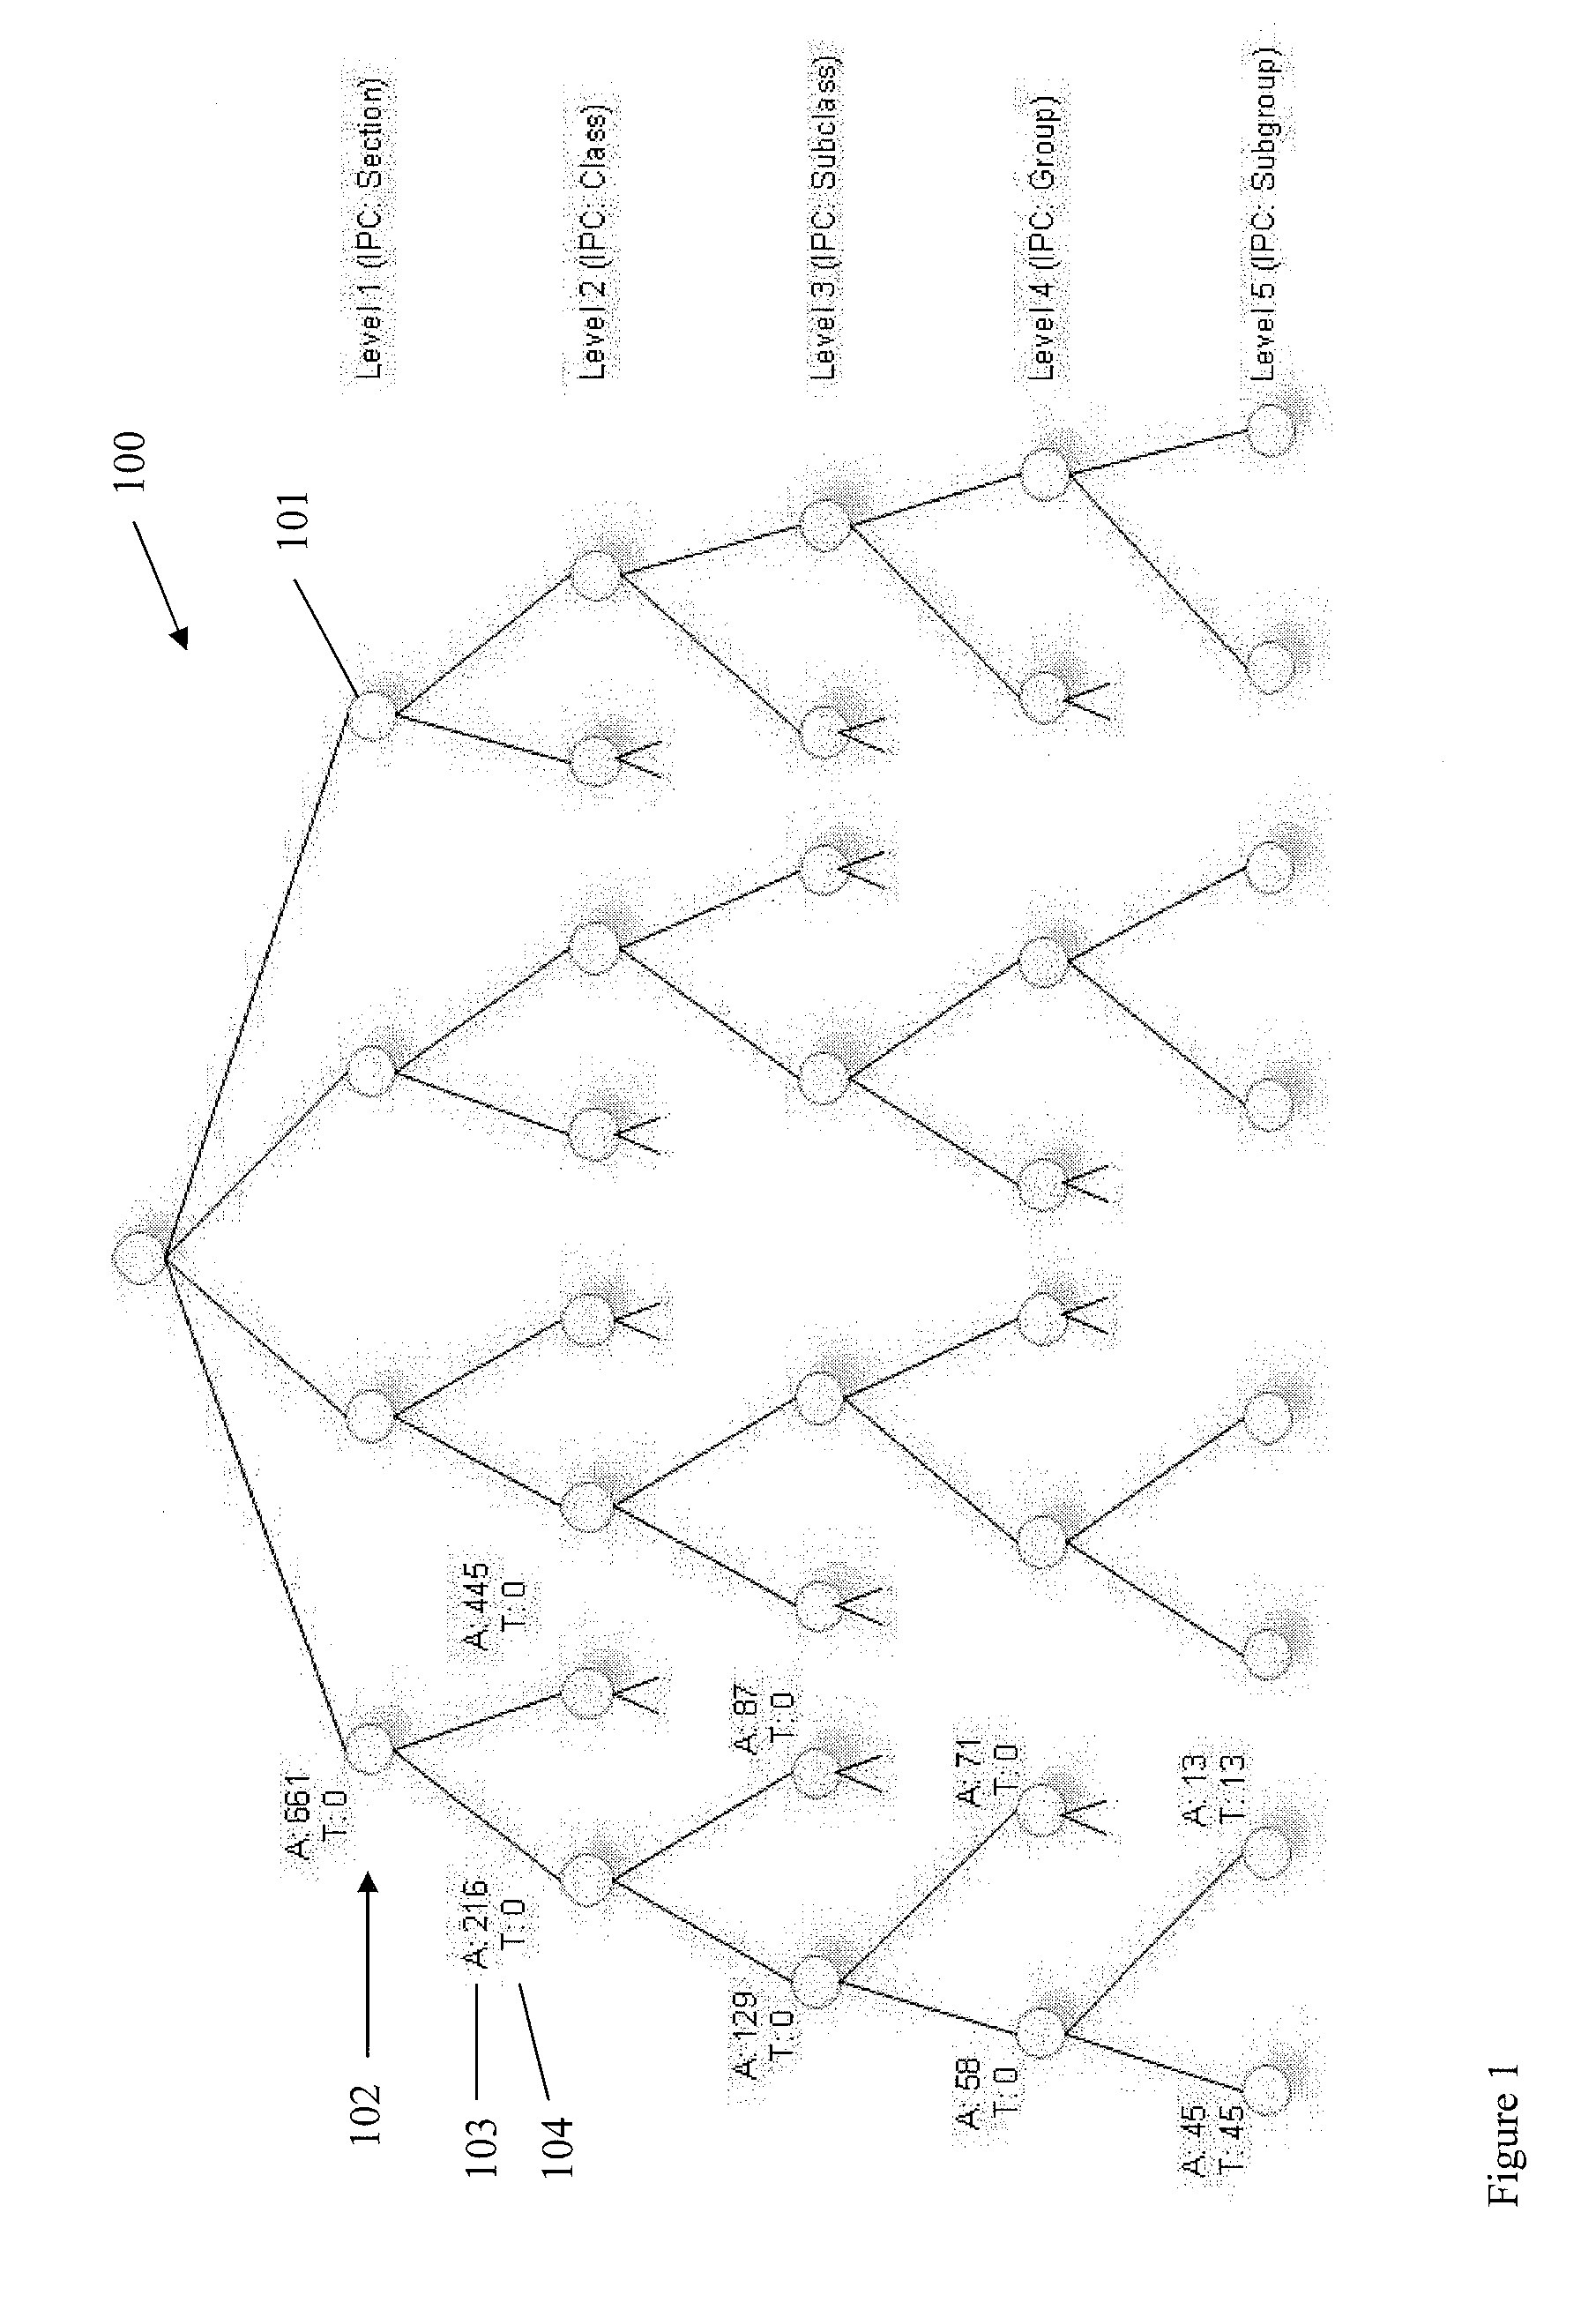 Method for creating association index for the analysis of documents classified in a hierarchical structure using frequency distribution, a taxonomic structure, normalizing and weighting